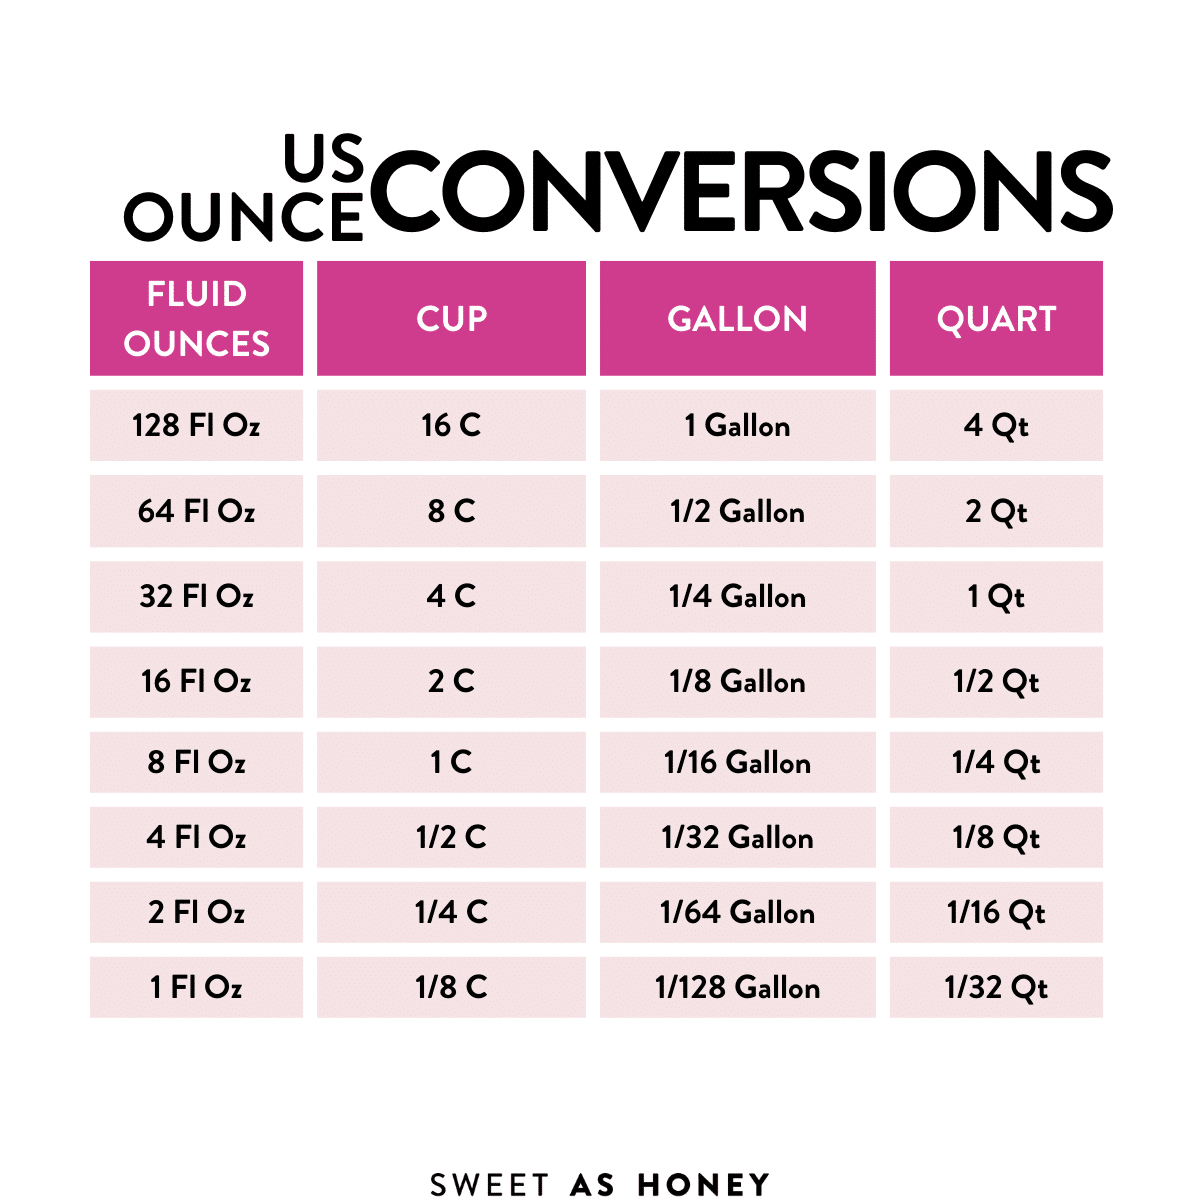 How Many Ounces Are In A Cup - US Cup to Ounce, gallon, and quart conversion table.